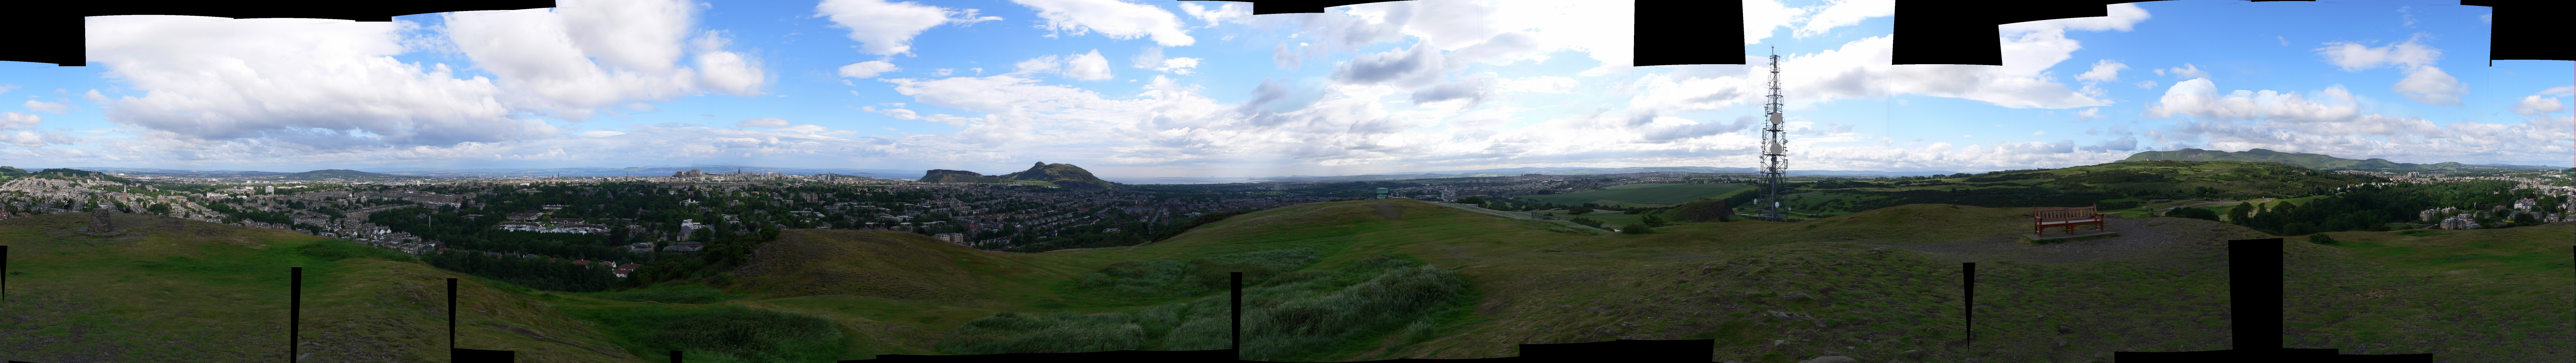 Edinburgh City - 360 View from the Royal Observatory - Panorama.JPG